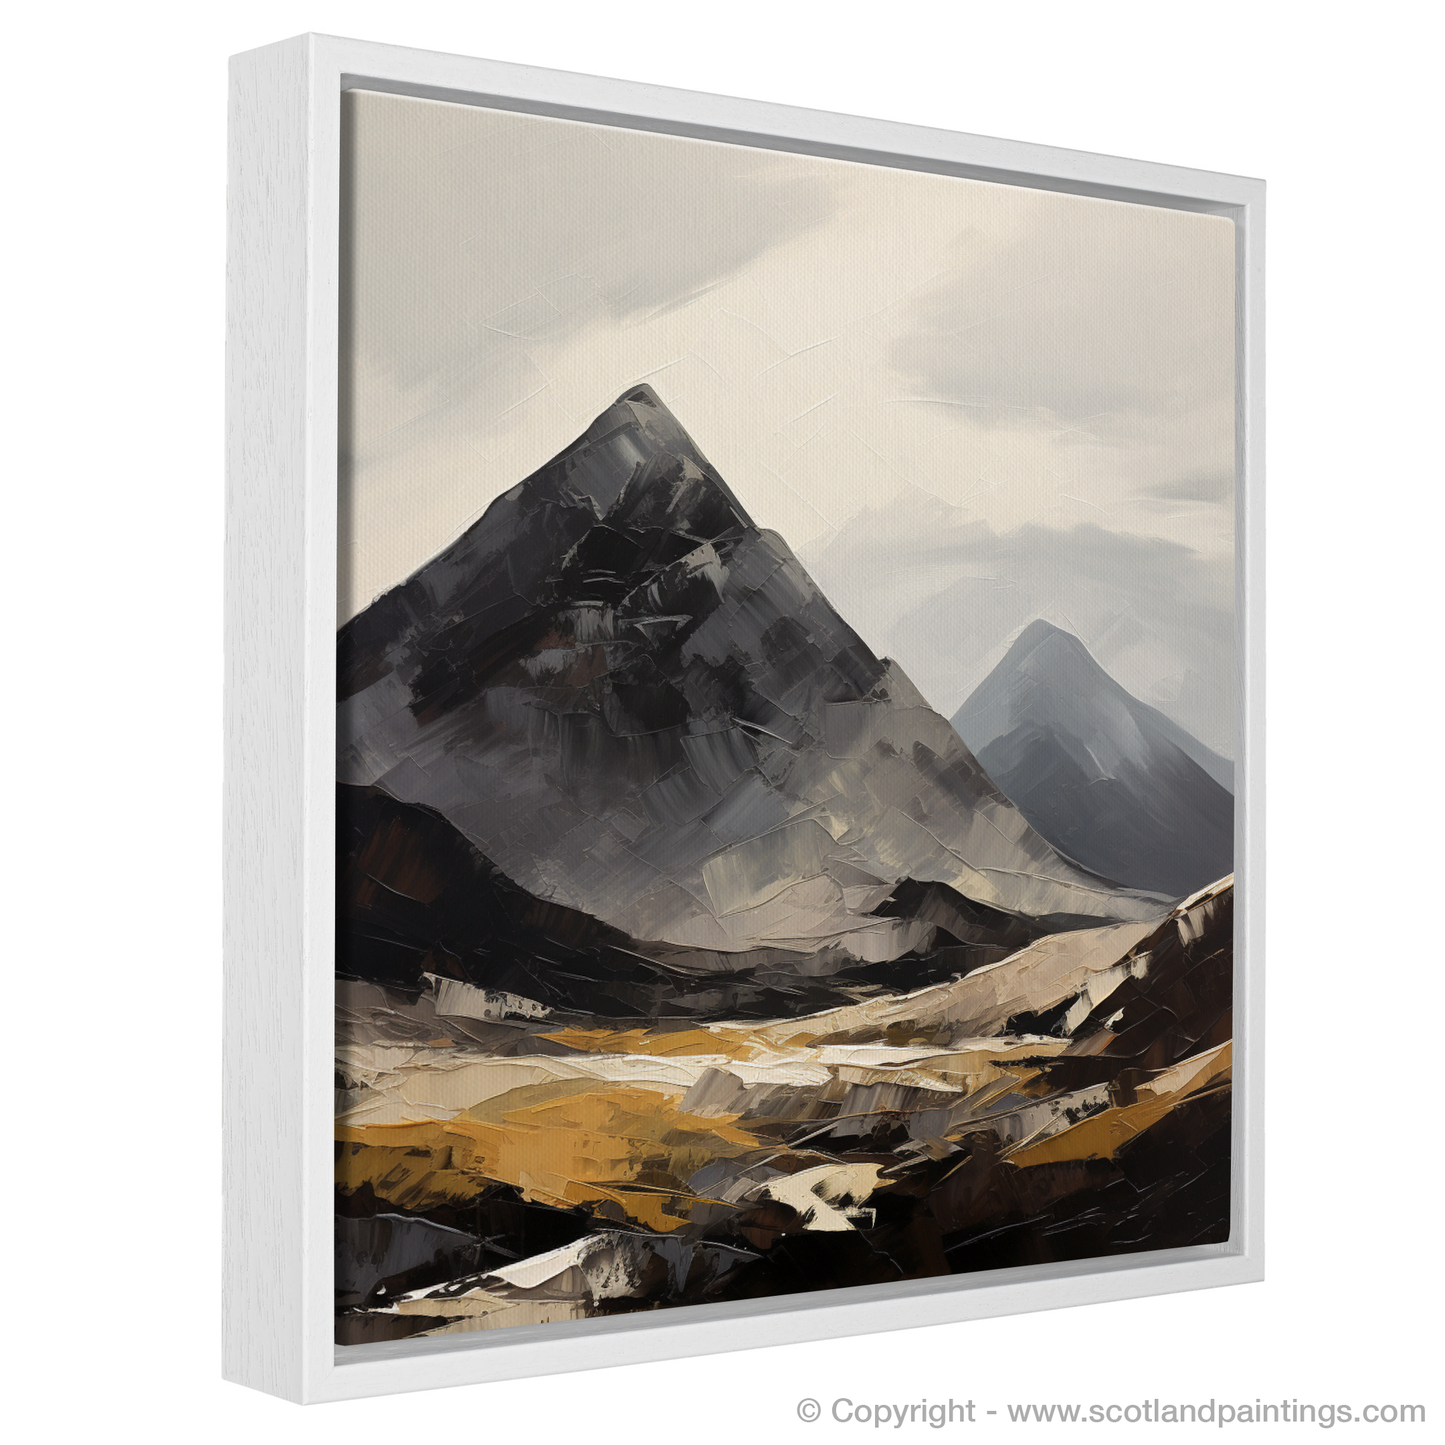 Painting and Art Print of Beinn Ìme entitled "Expressionist Majesty of Beinn Ìme".